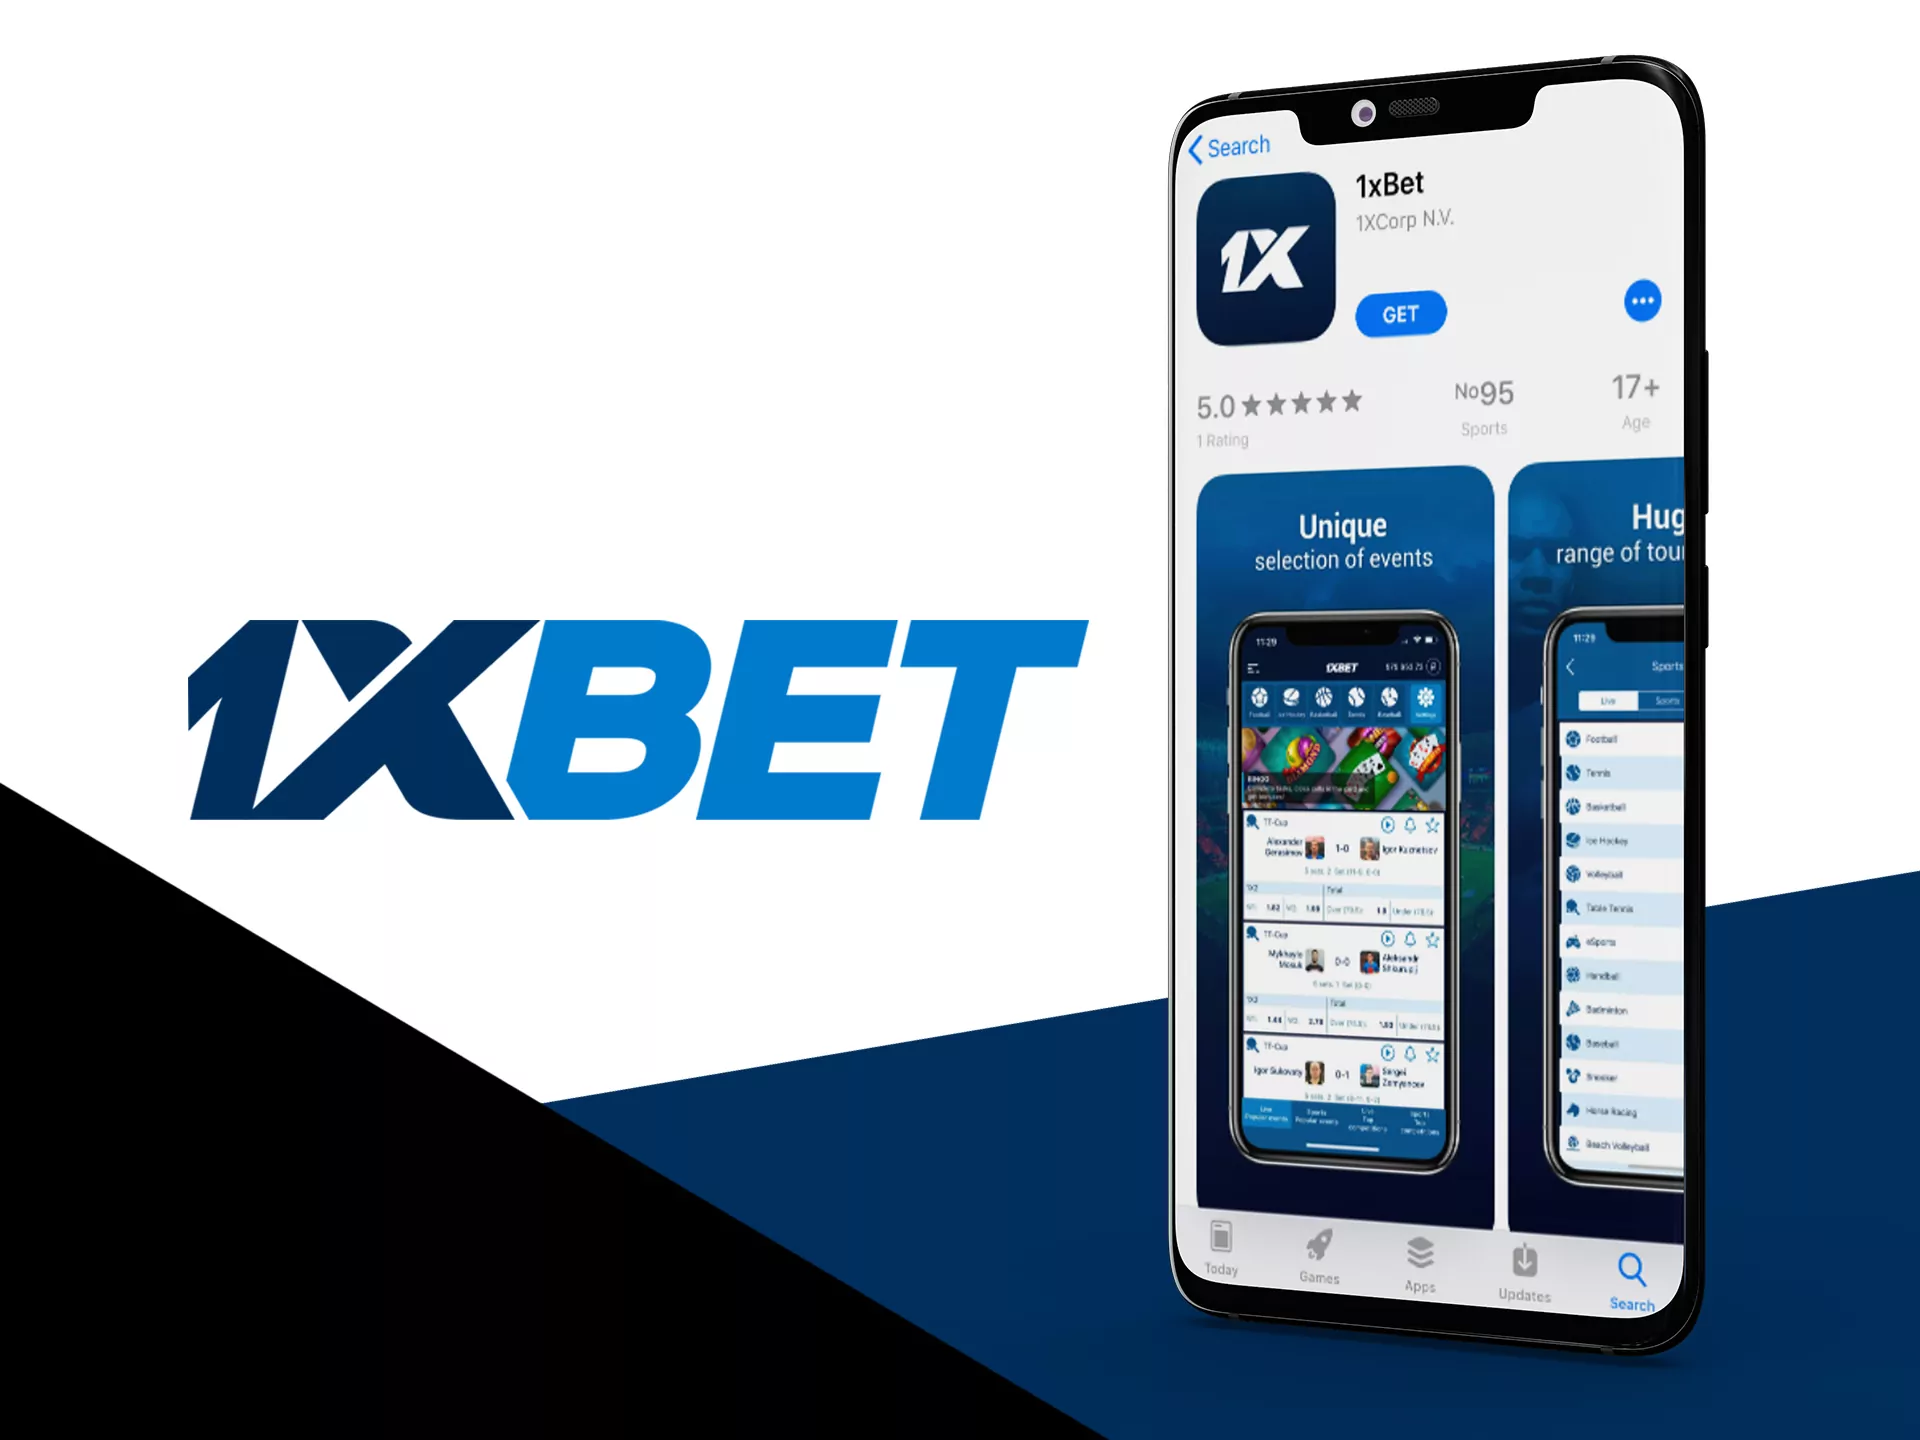 Full instruction for getting 1xbet app for iOS.